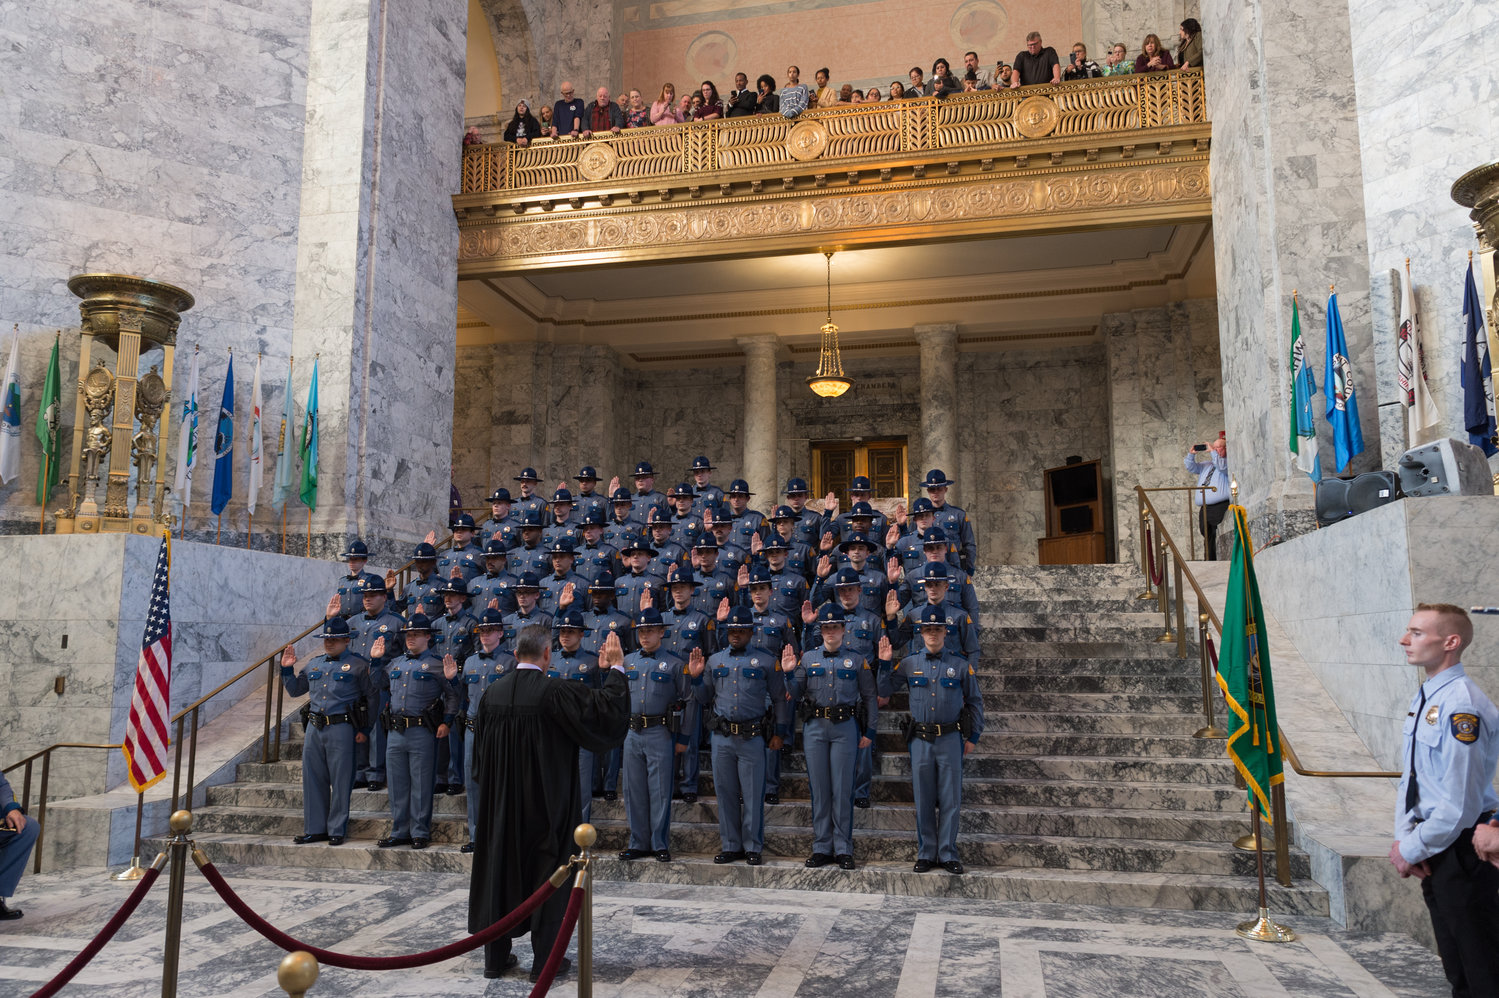 The Washington State Patrol introduced 44 newly commissioned troopers to its ranks on Nov. 16  during the 116th Trooper Basic Training graduation ceremony held at the Capitol Rotunda in Olympia.